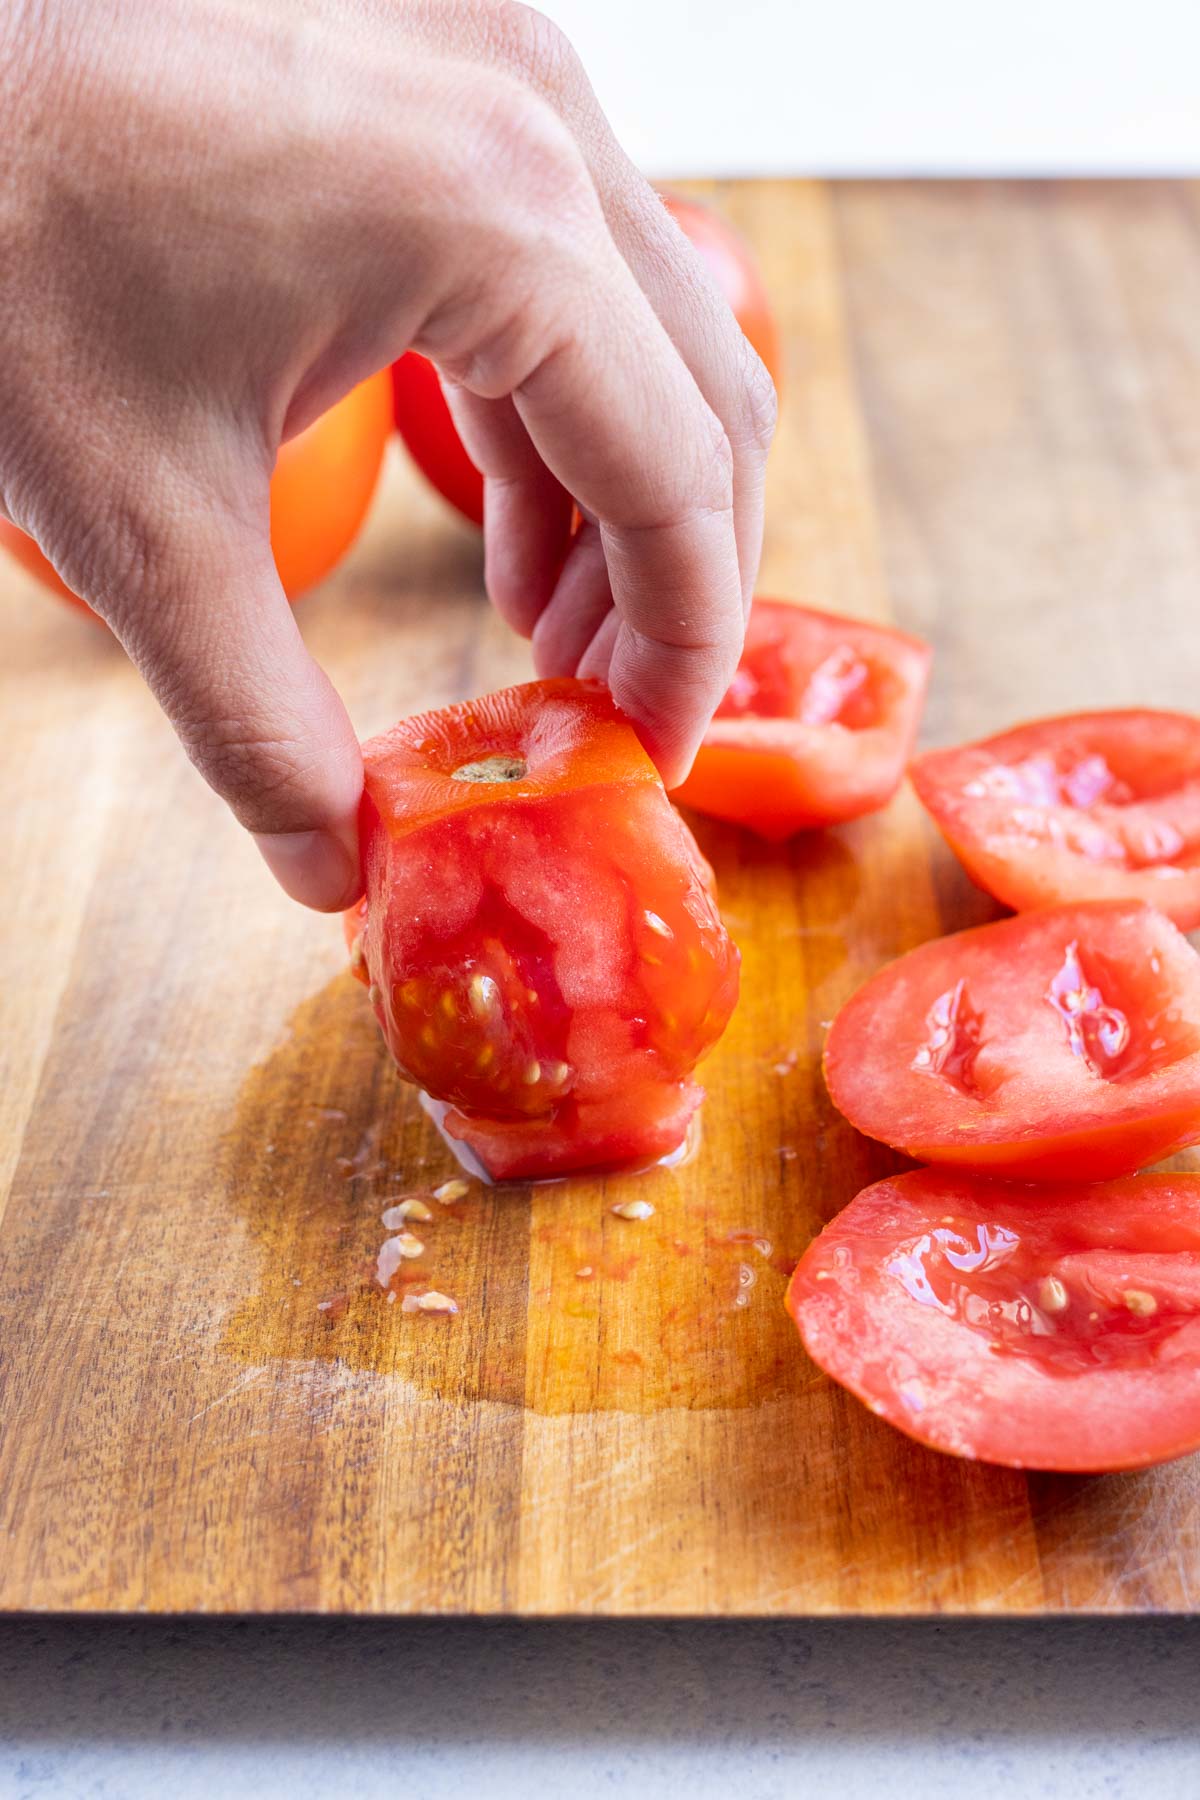 After cutting, only the core of the tomato remains.